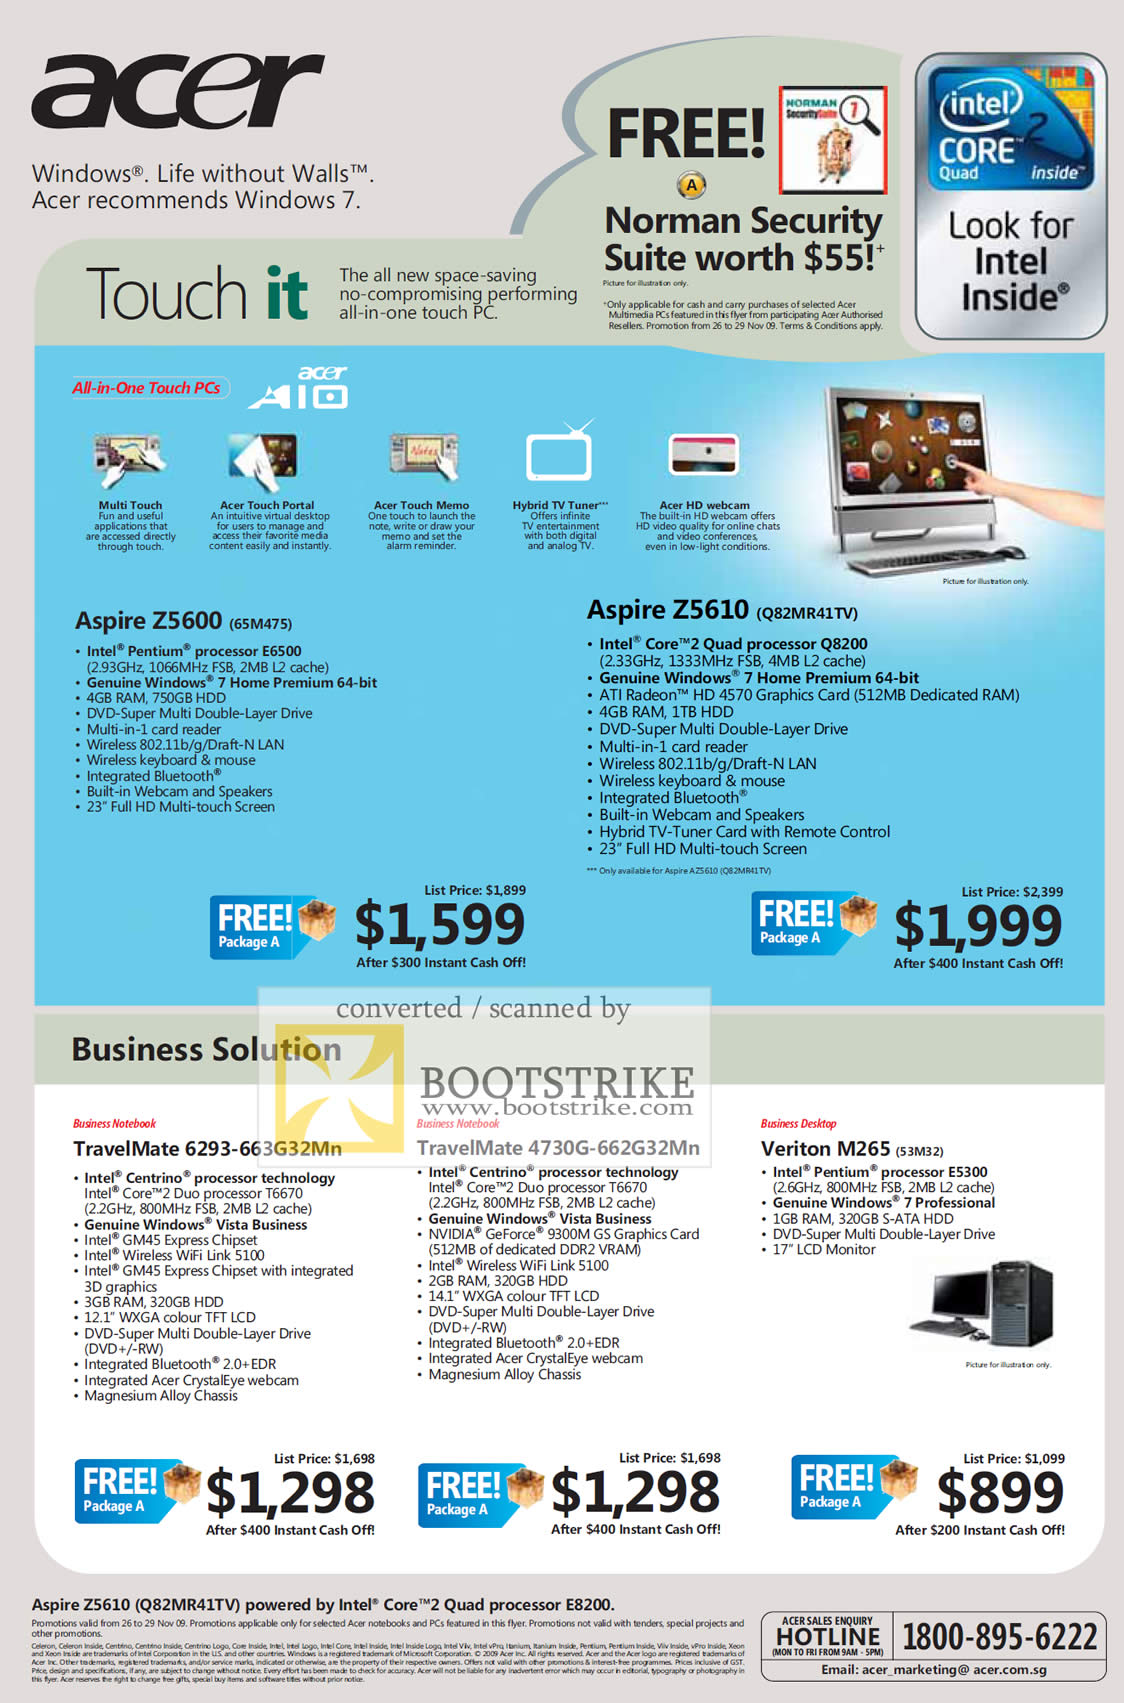 Sitex 2009 price list image brochure of Acer Aspire Touch PC Z5600 Z5610 Business Notebook TravelMate Veriton